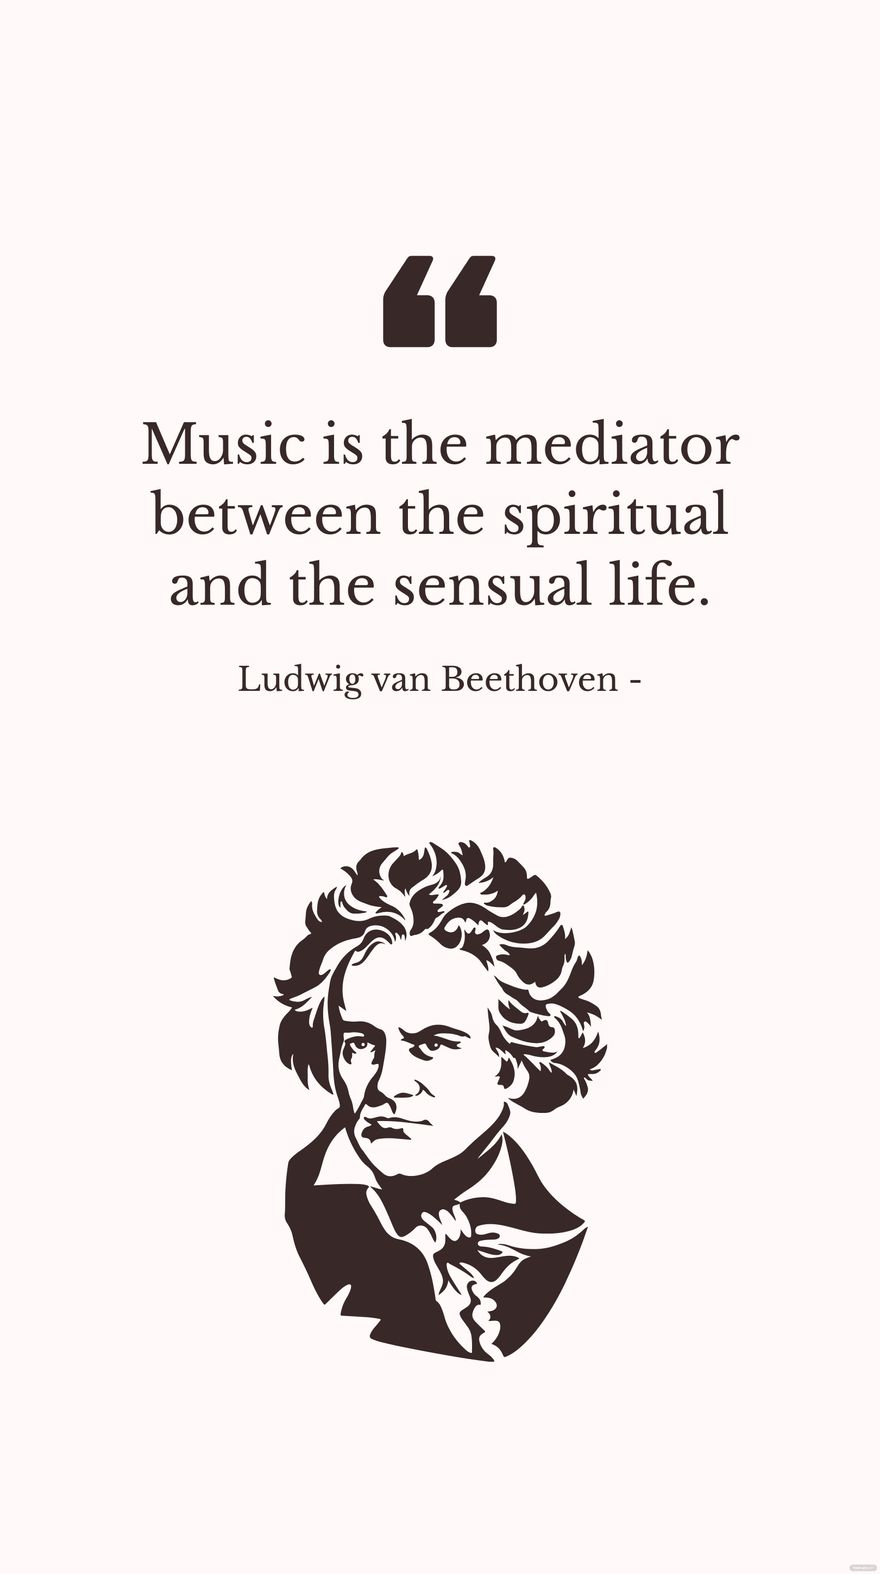 Free Ludwig van Beethoven - Music is the mediator between the spiritual and the sensual life. in JPG